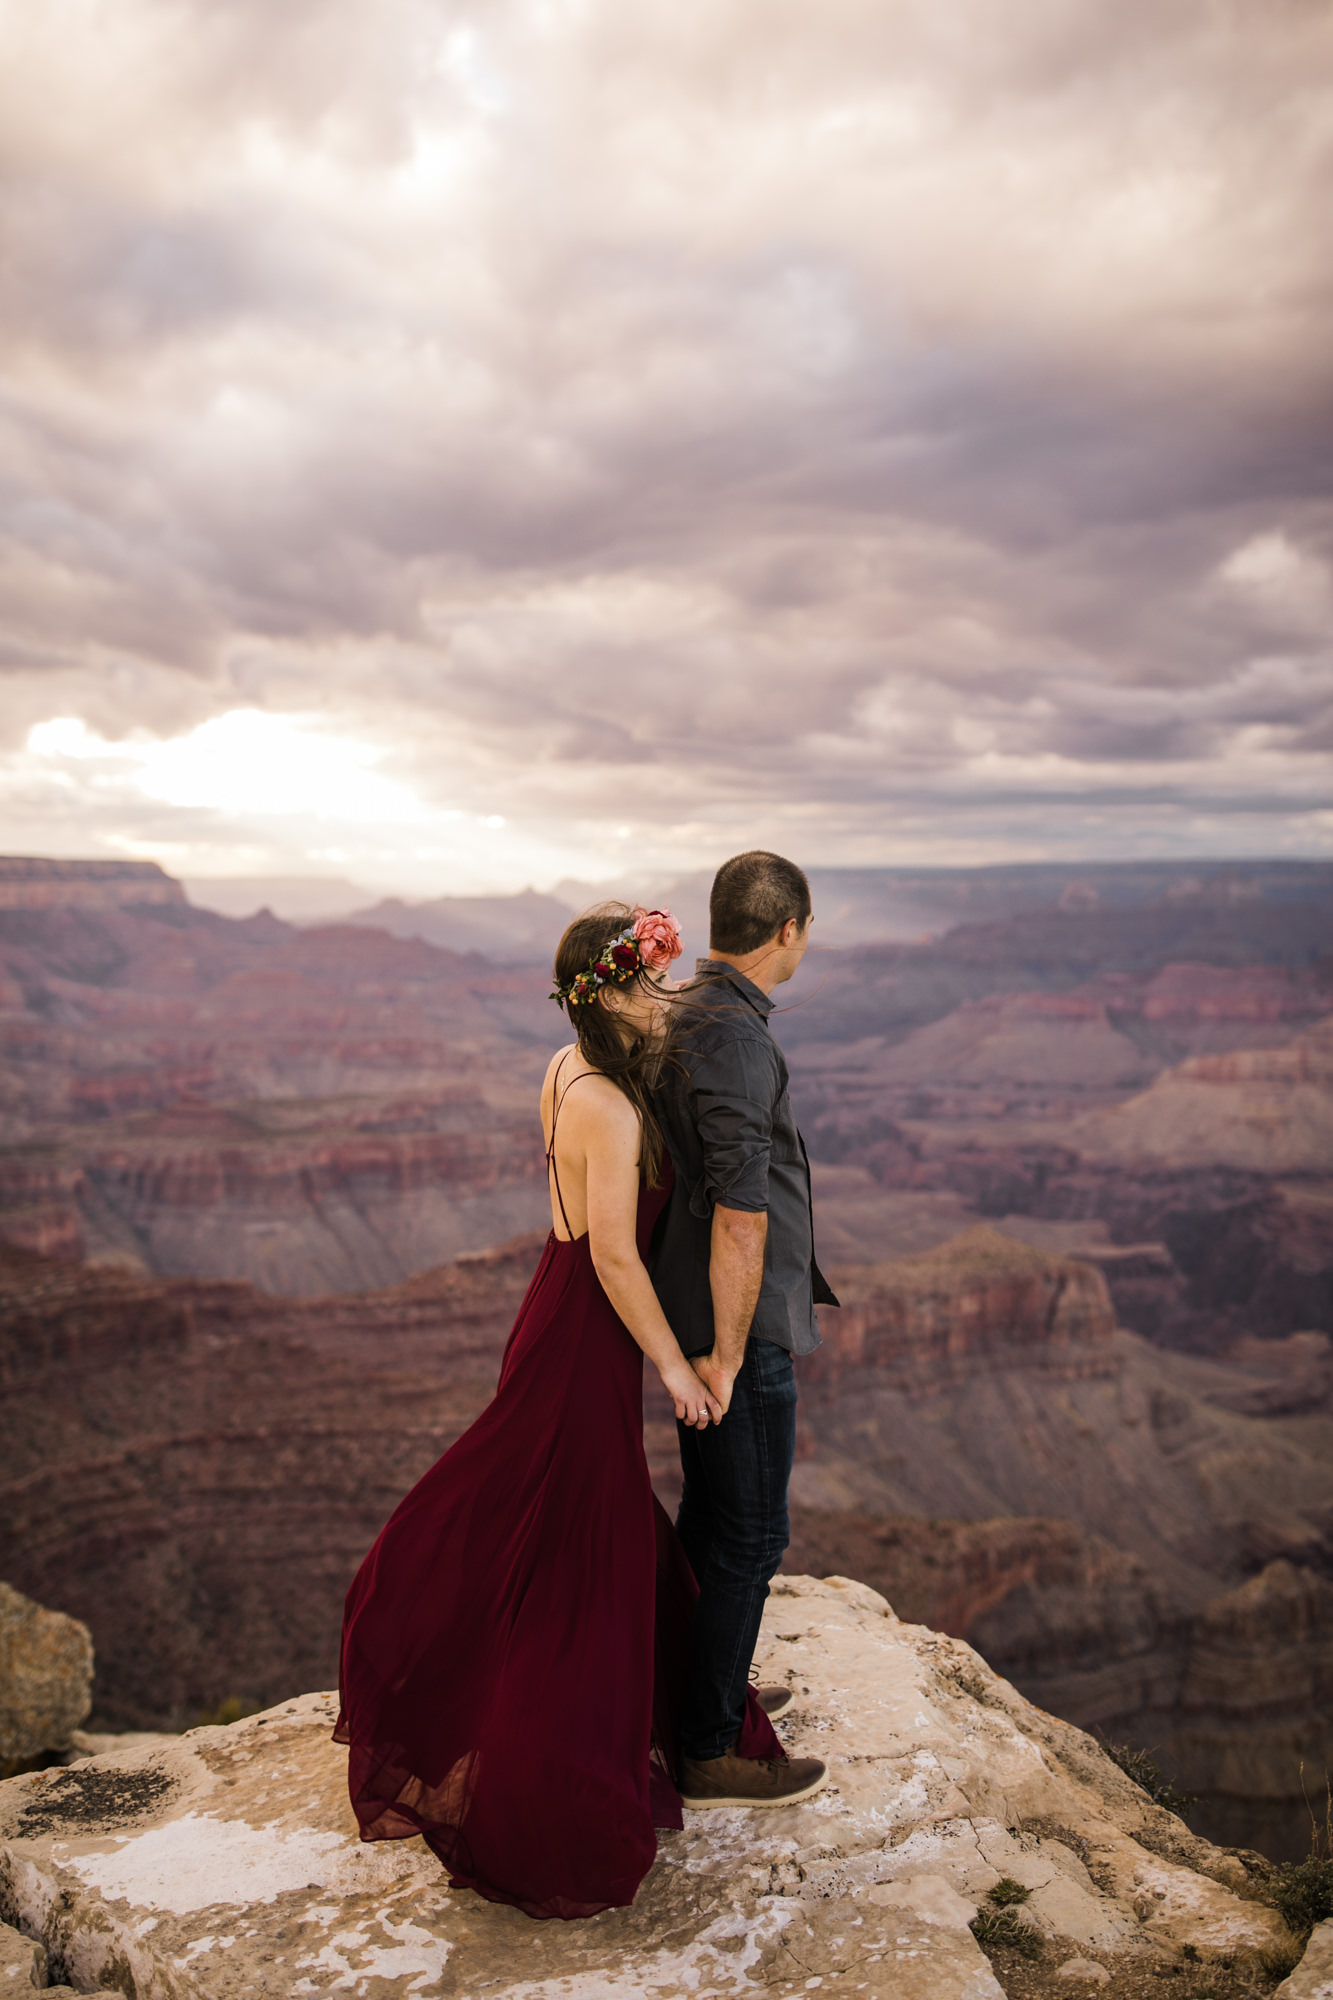 alex + stephen's grand canyon national park engagement session | desert elopement inspiration | weddings in national parks | the hearnes adventure photography | www.thehearnes.com